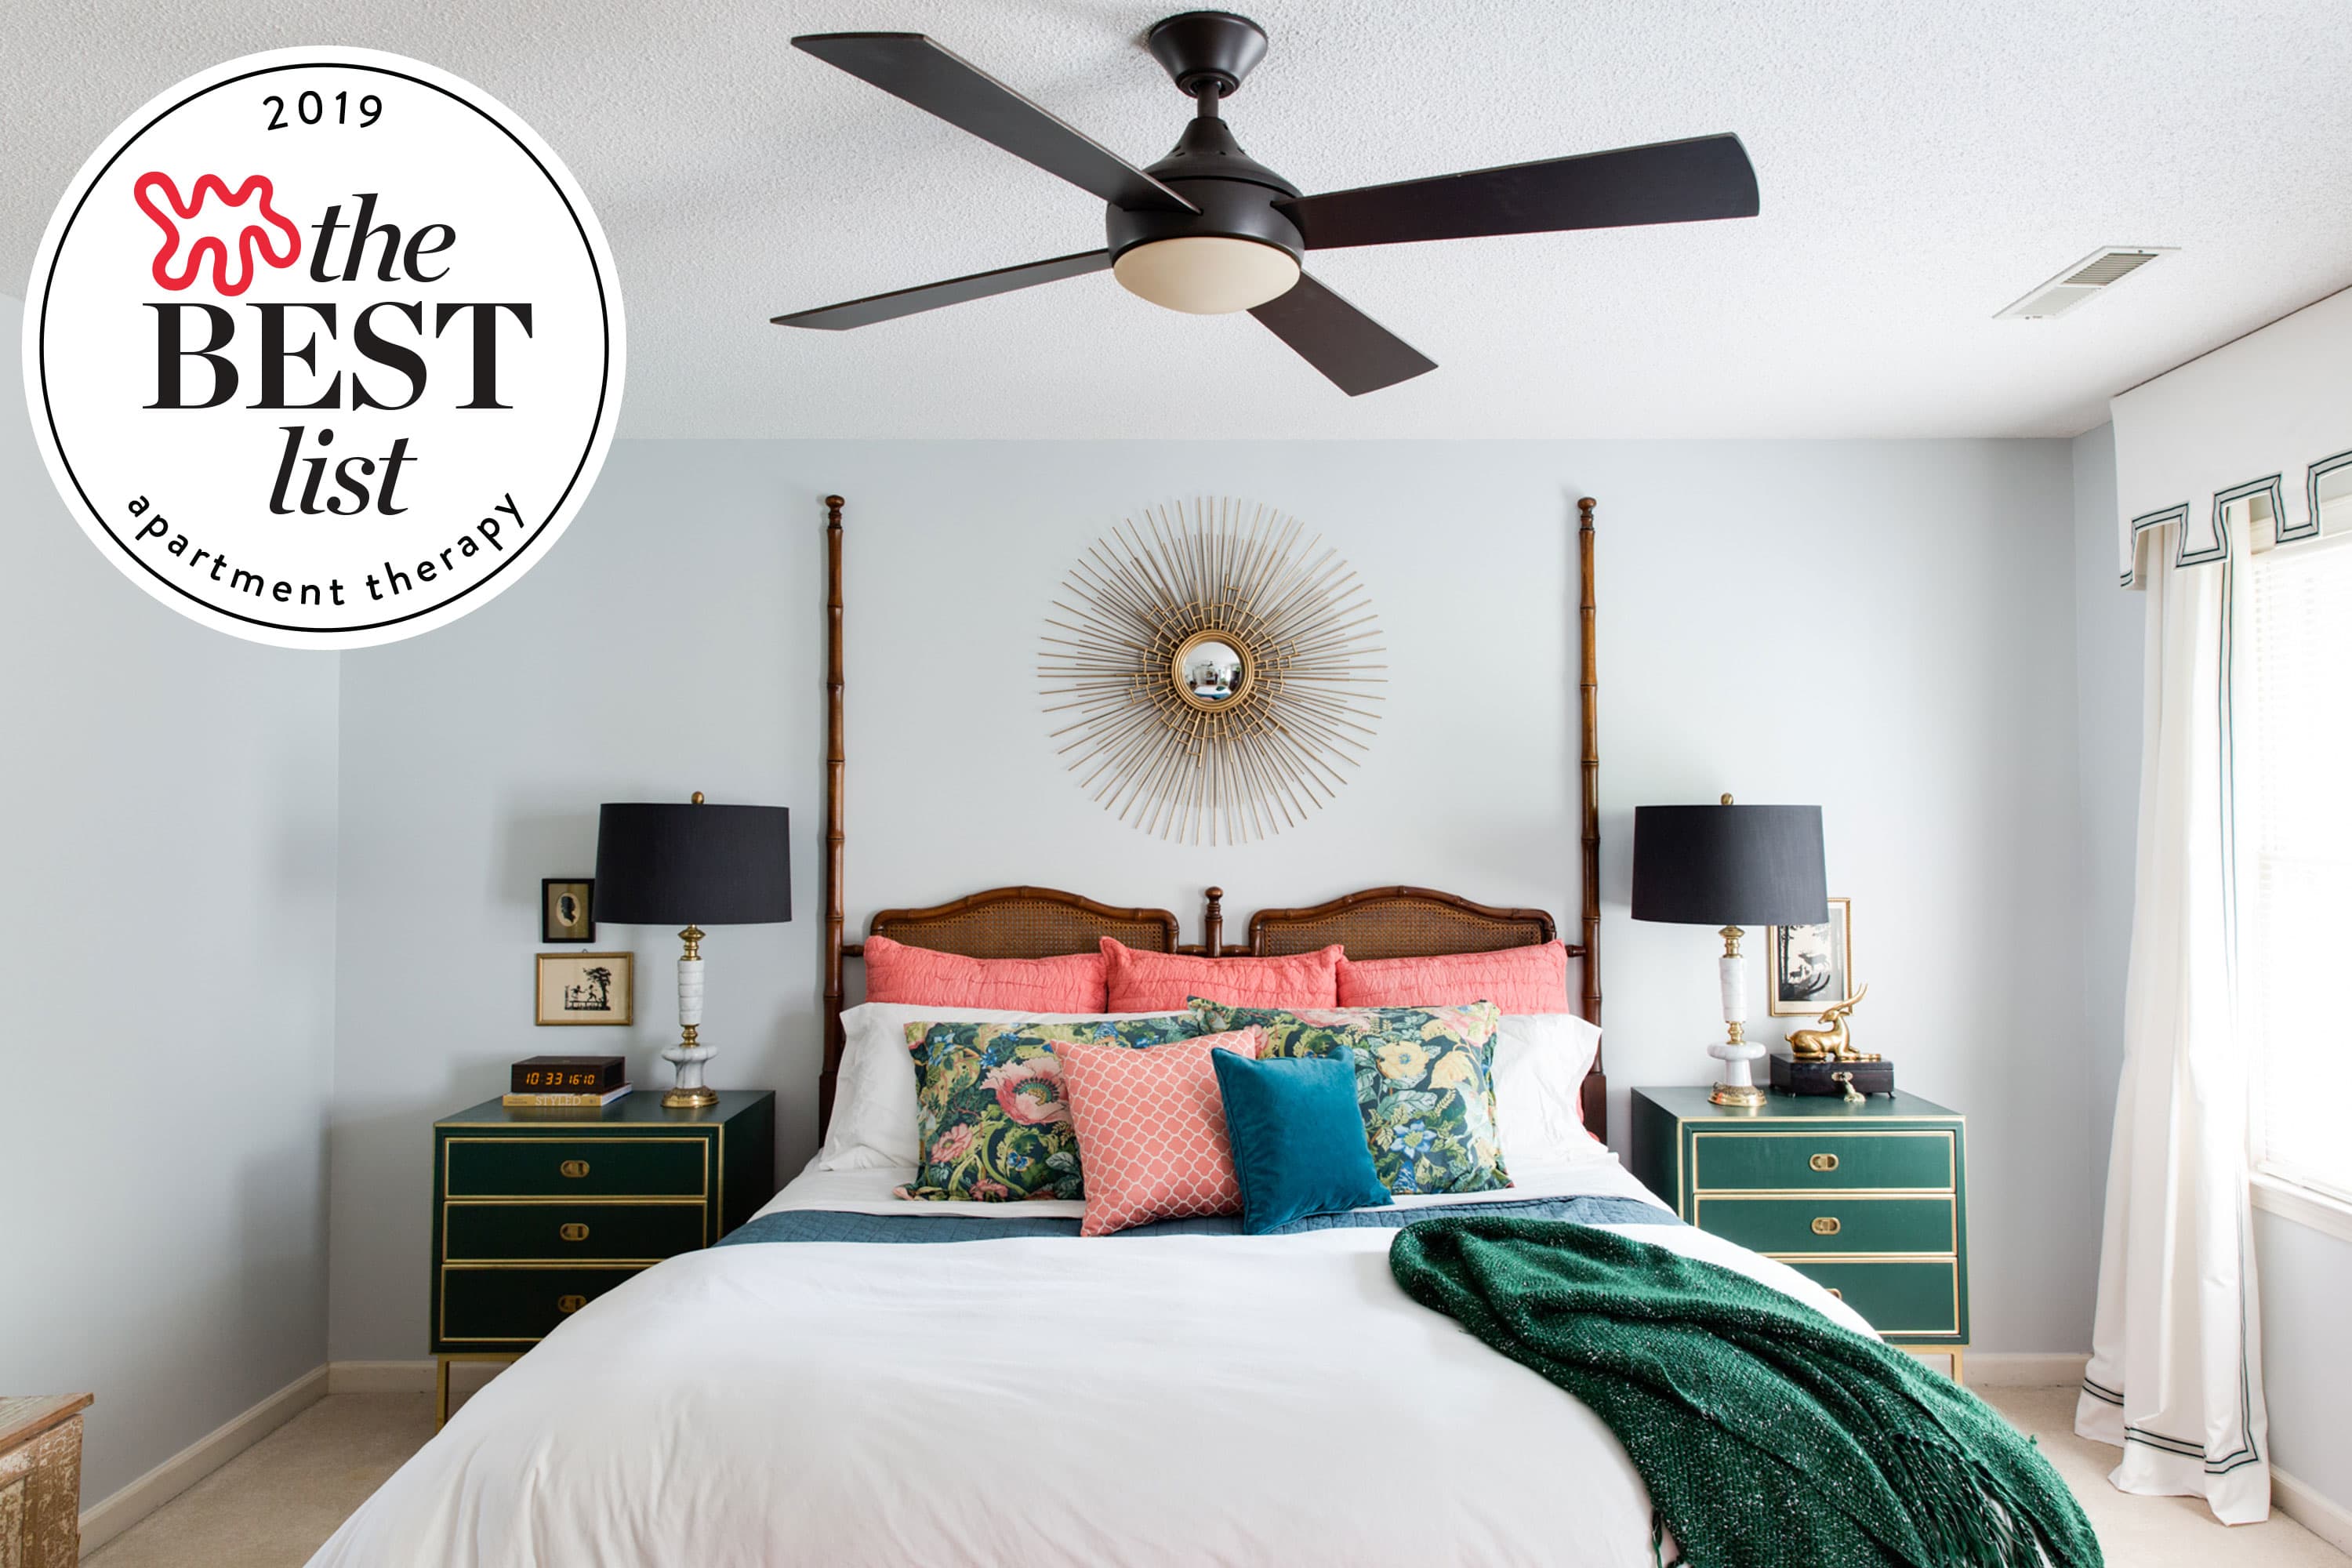 11 Modern And Attractive Ceiling Fans For Outdoors Bedrooms